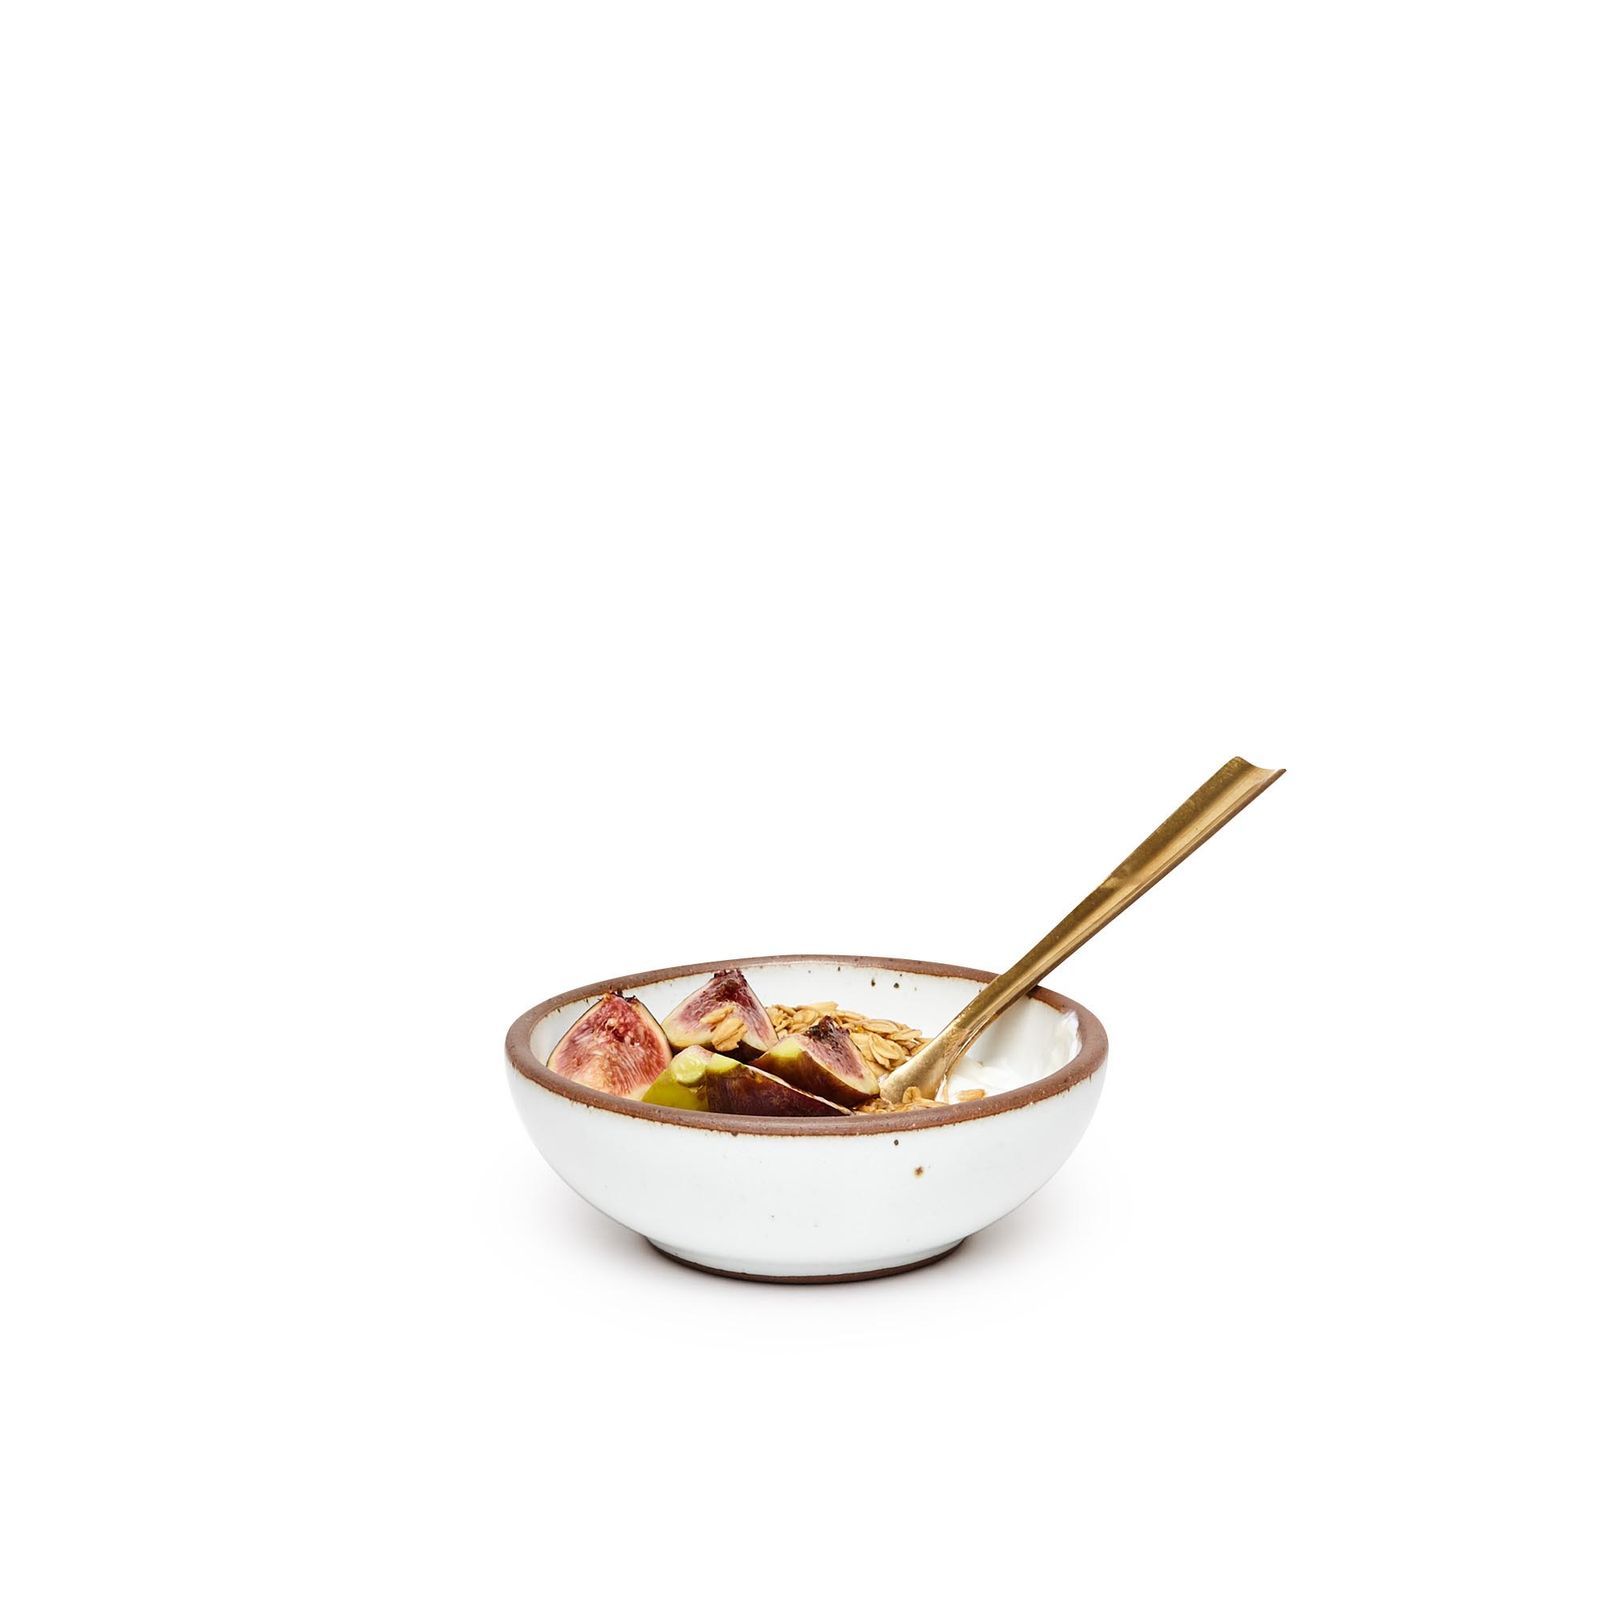 An eggshell white colored bowl, filled with figs, yogurt and granola, soon-to-be eaten with a brass spoon.